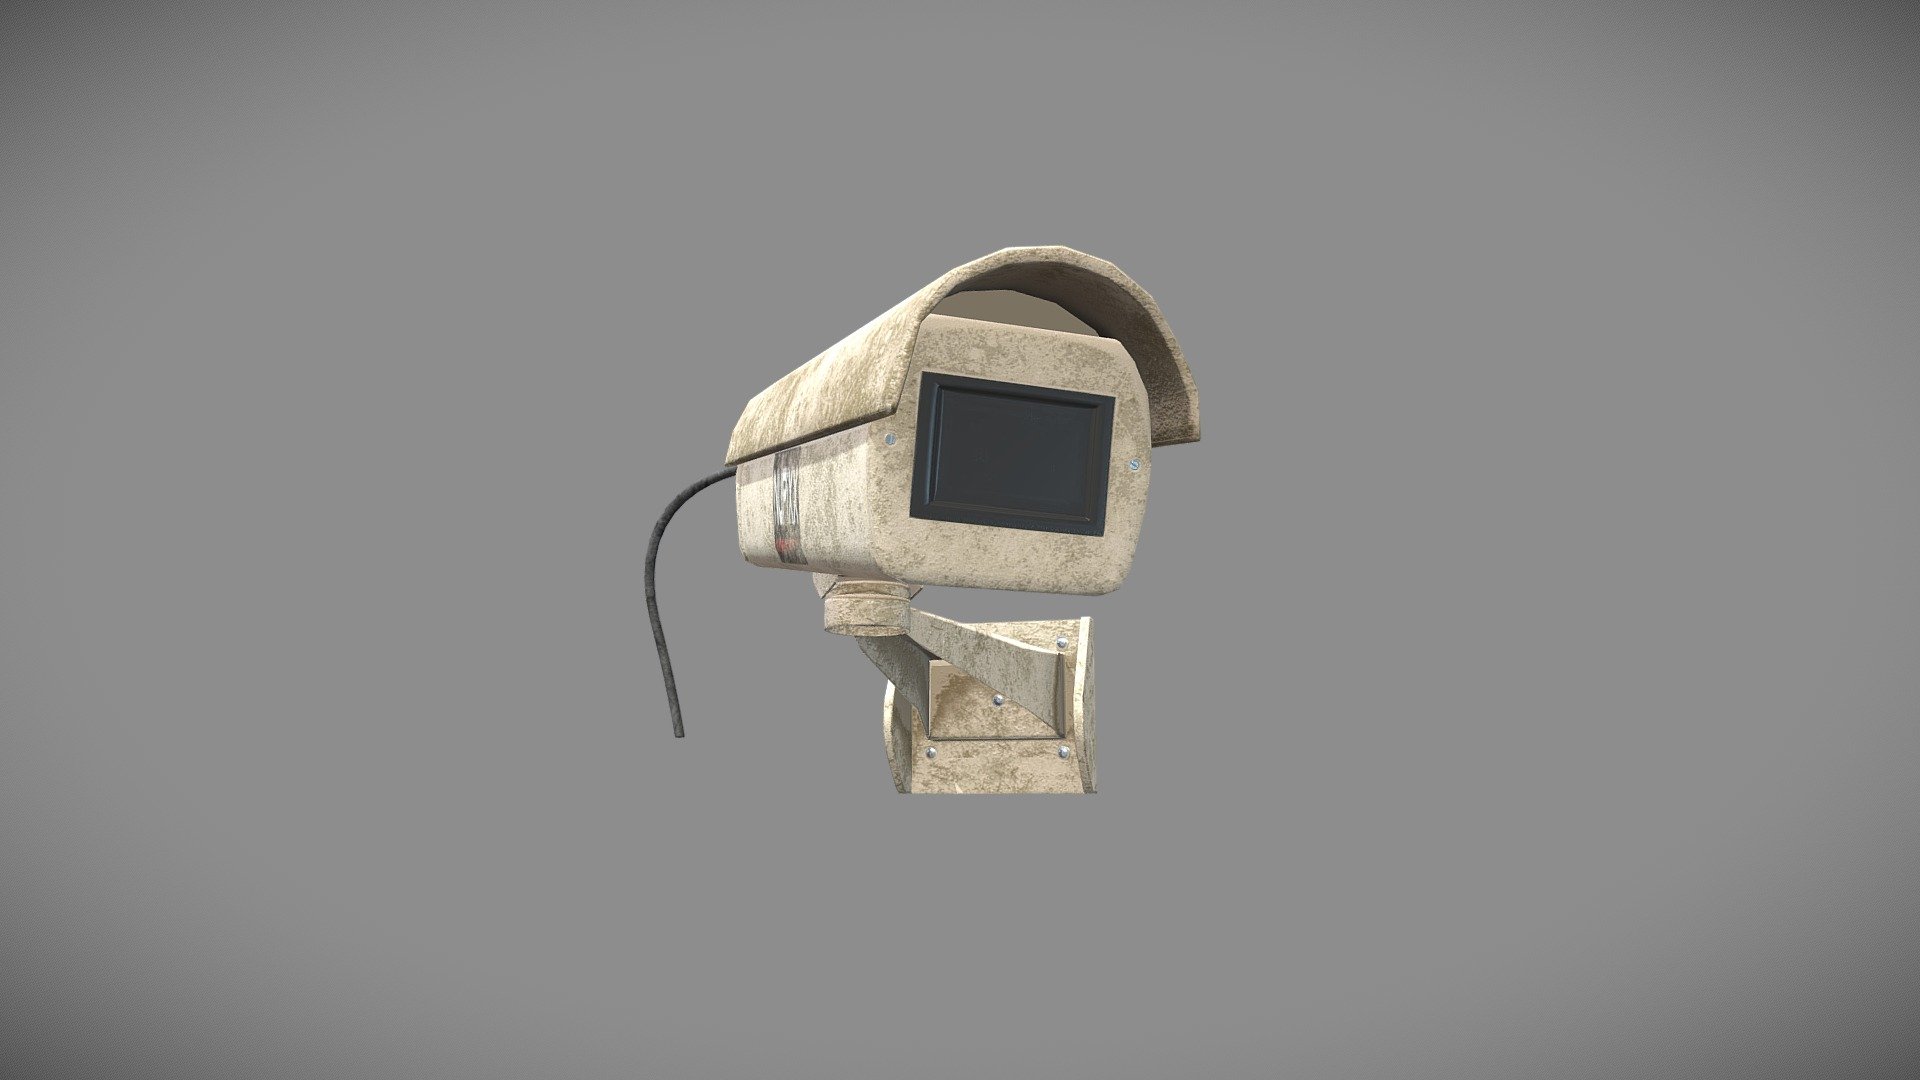 Security Camera model thats mainly used for outdoor started this model as a high res. then lowered the resolution and applied textures in Substance Painter 3d model